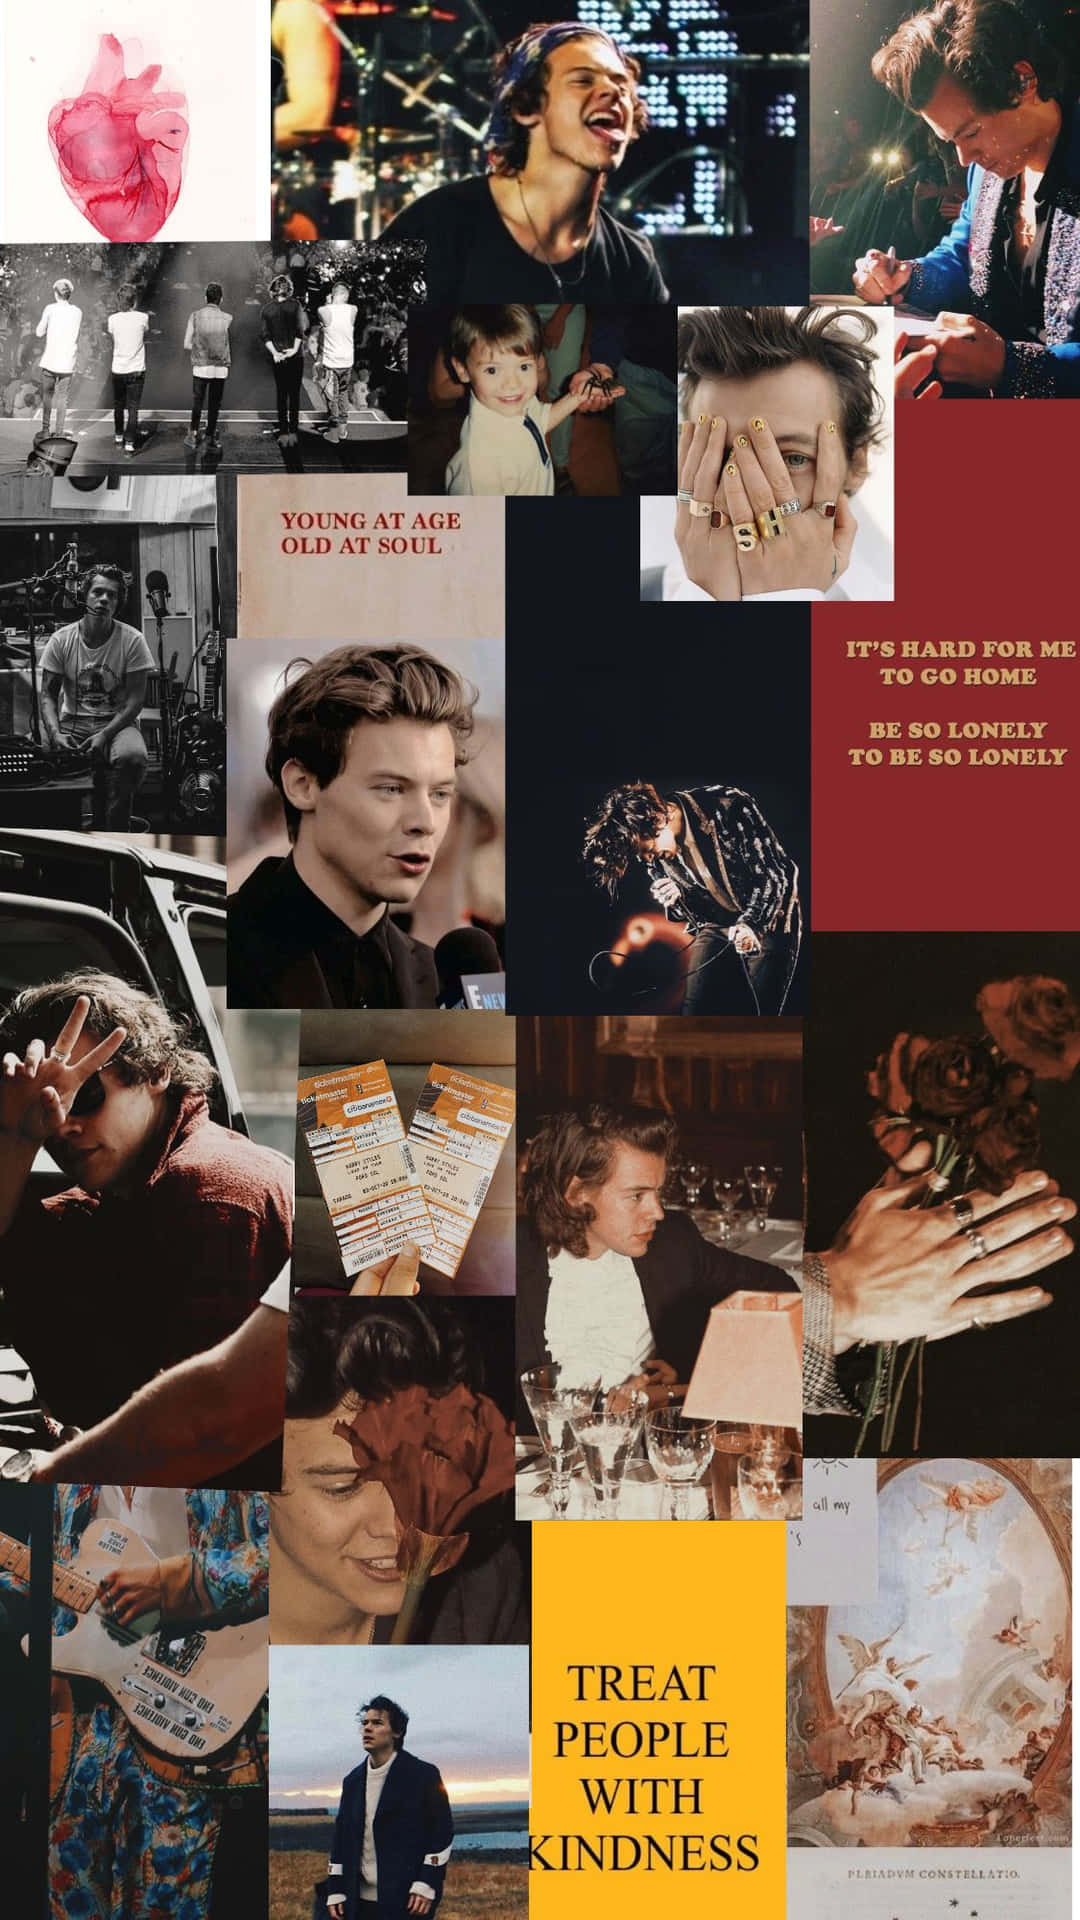 "Harry Styles: Pop Heartthrob Bringing a Timeless Cool to the Music Scene" Wallpaper